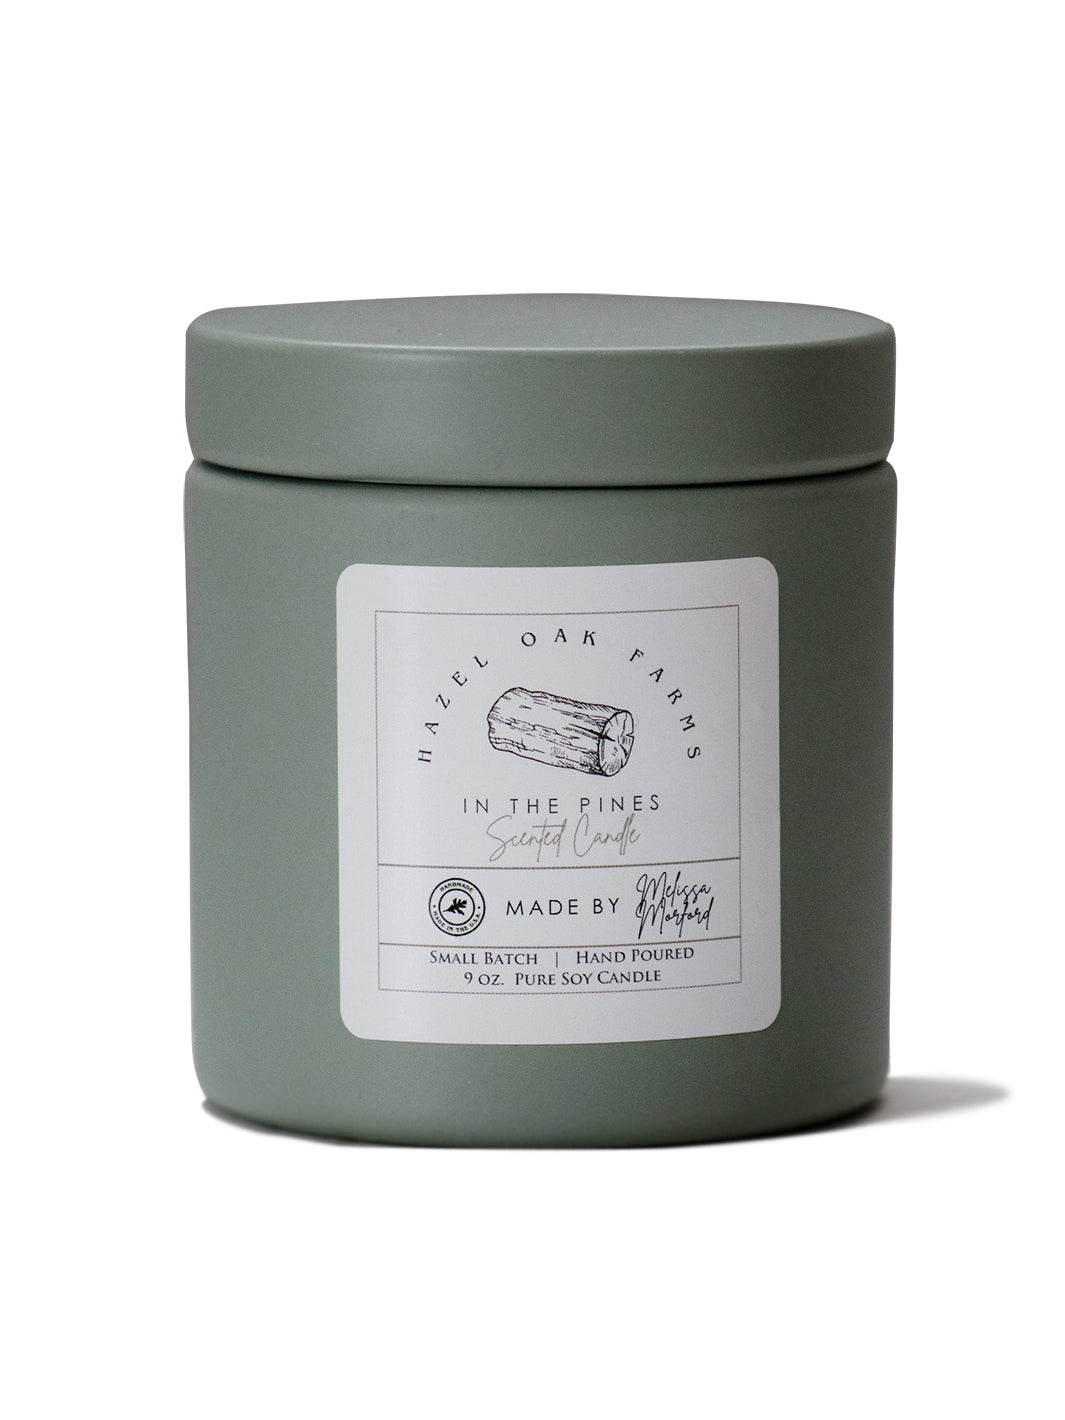 In the Pines - Melissa's Pure Soy Candles (in stock) Earthly Comfort Home Decor 2194